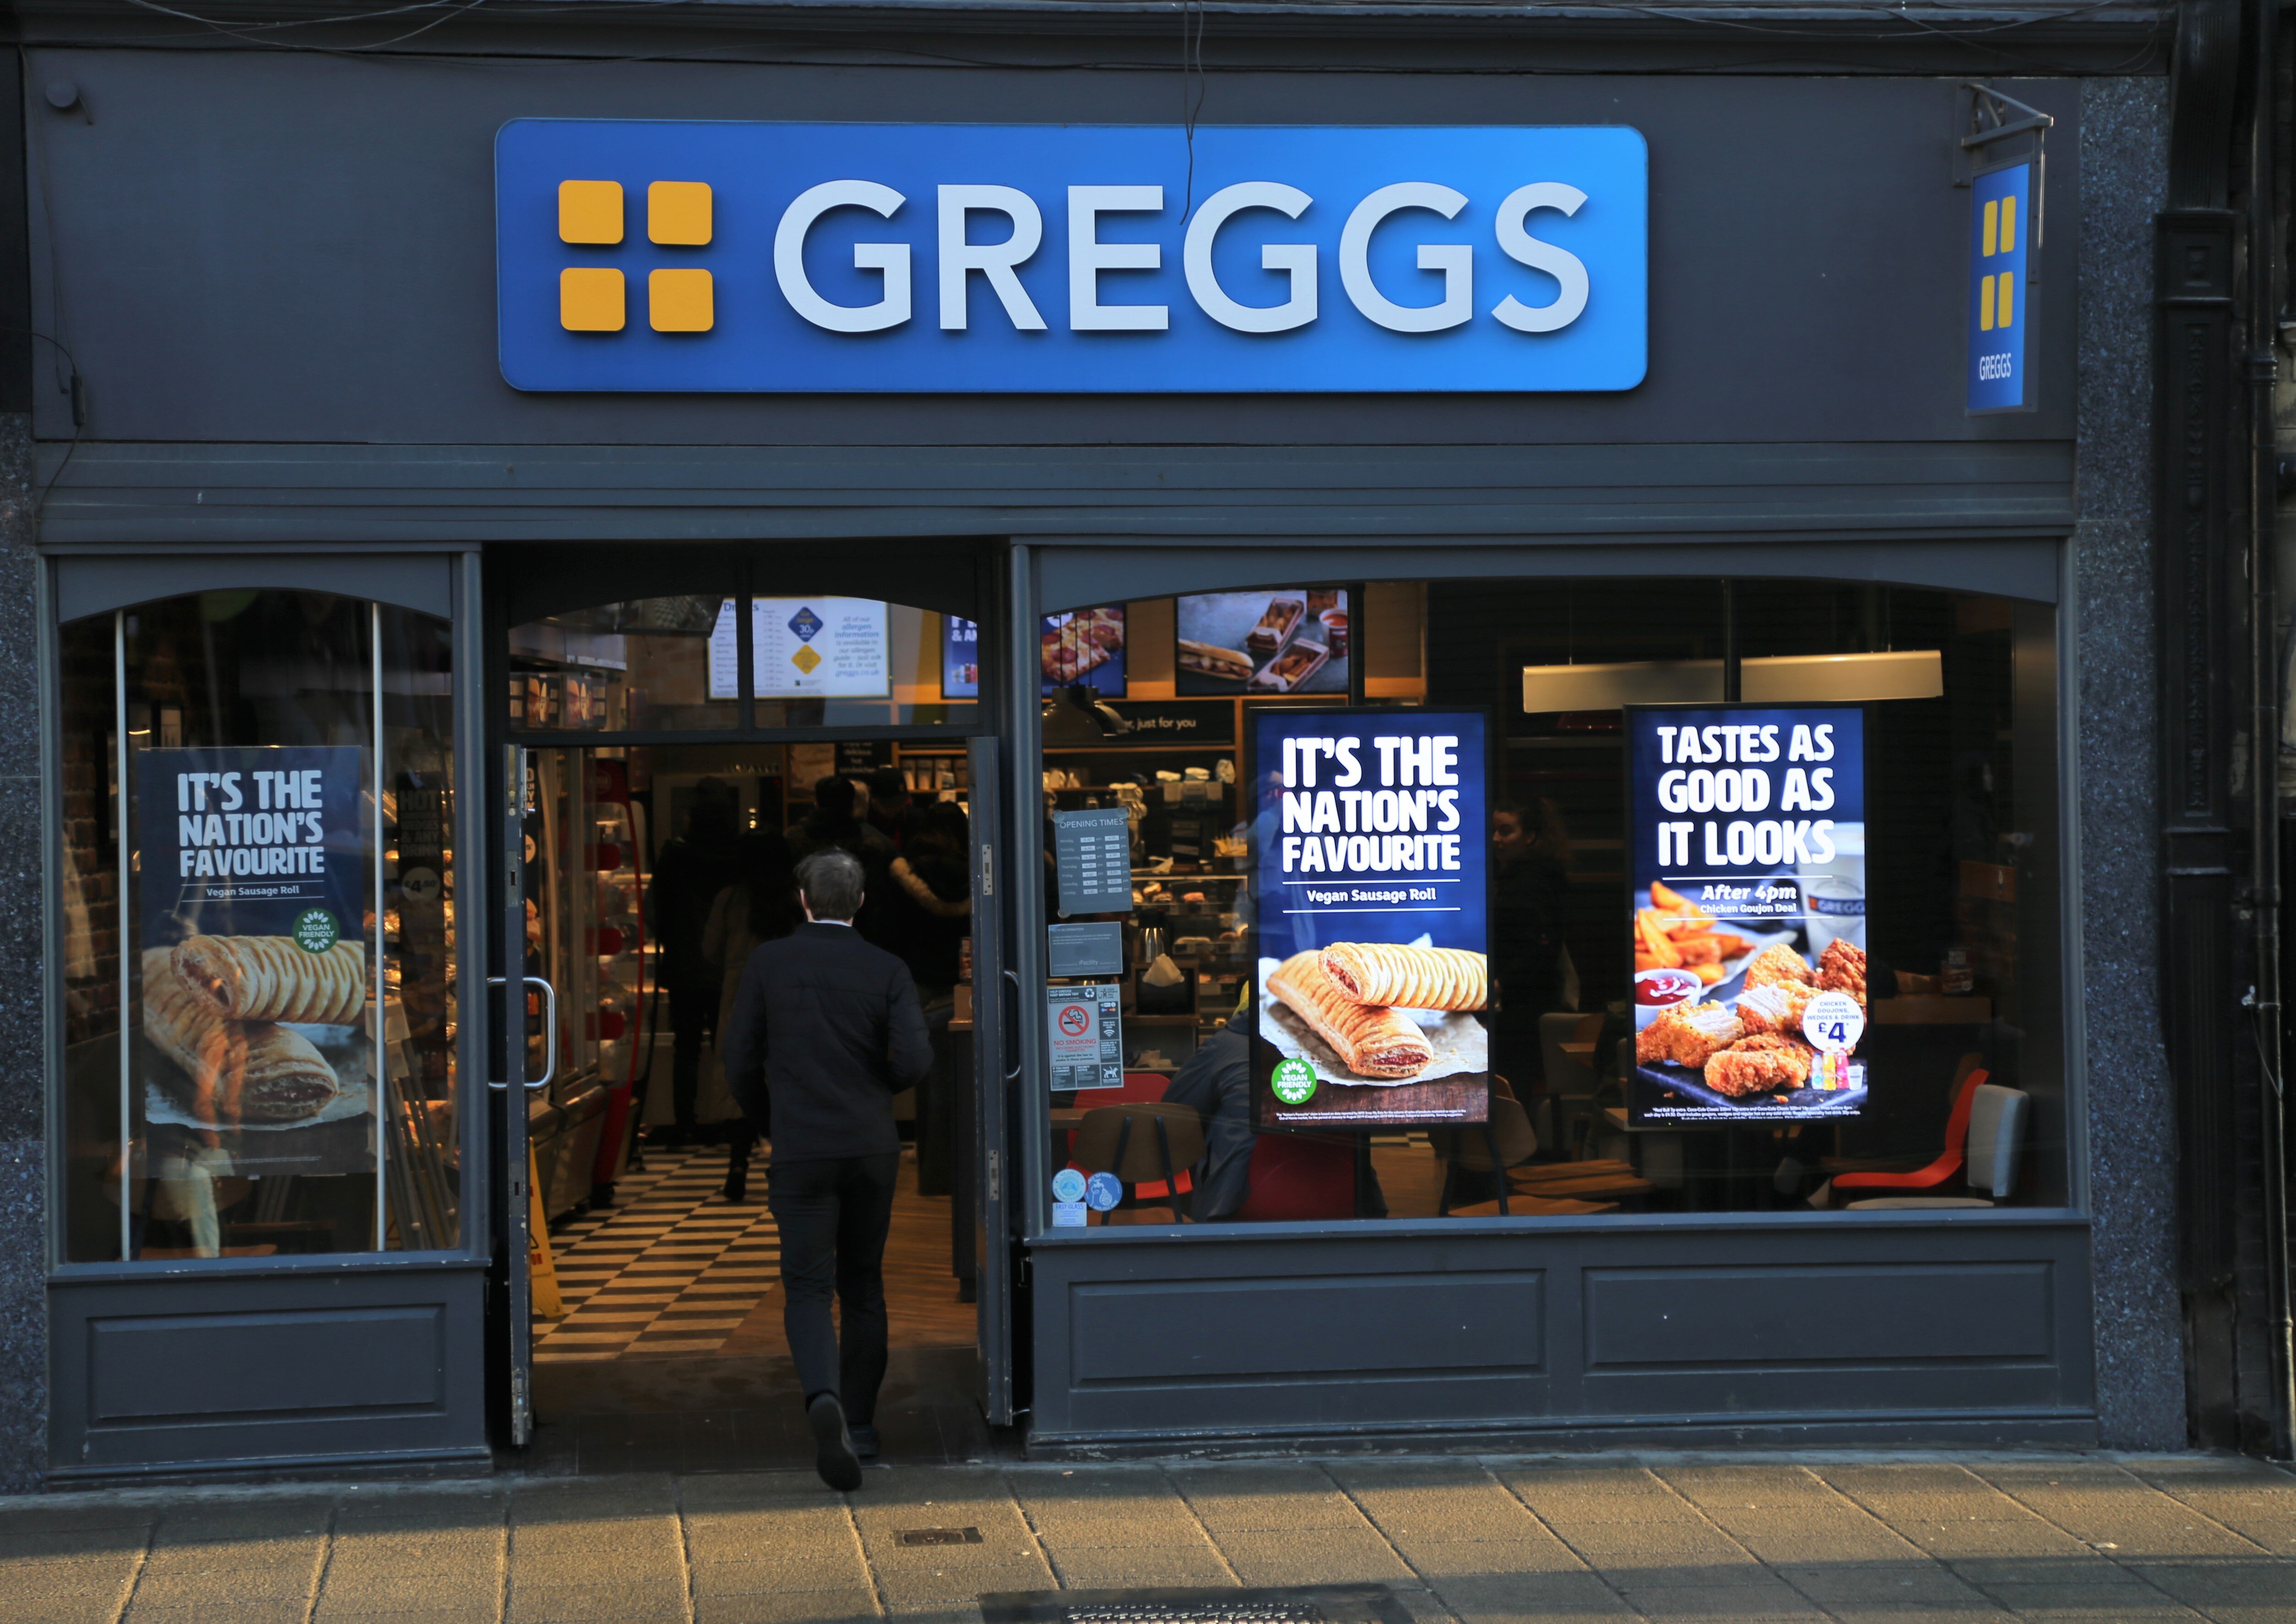 Greggs resolves technical issue that led to temporary store closures